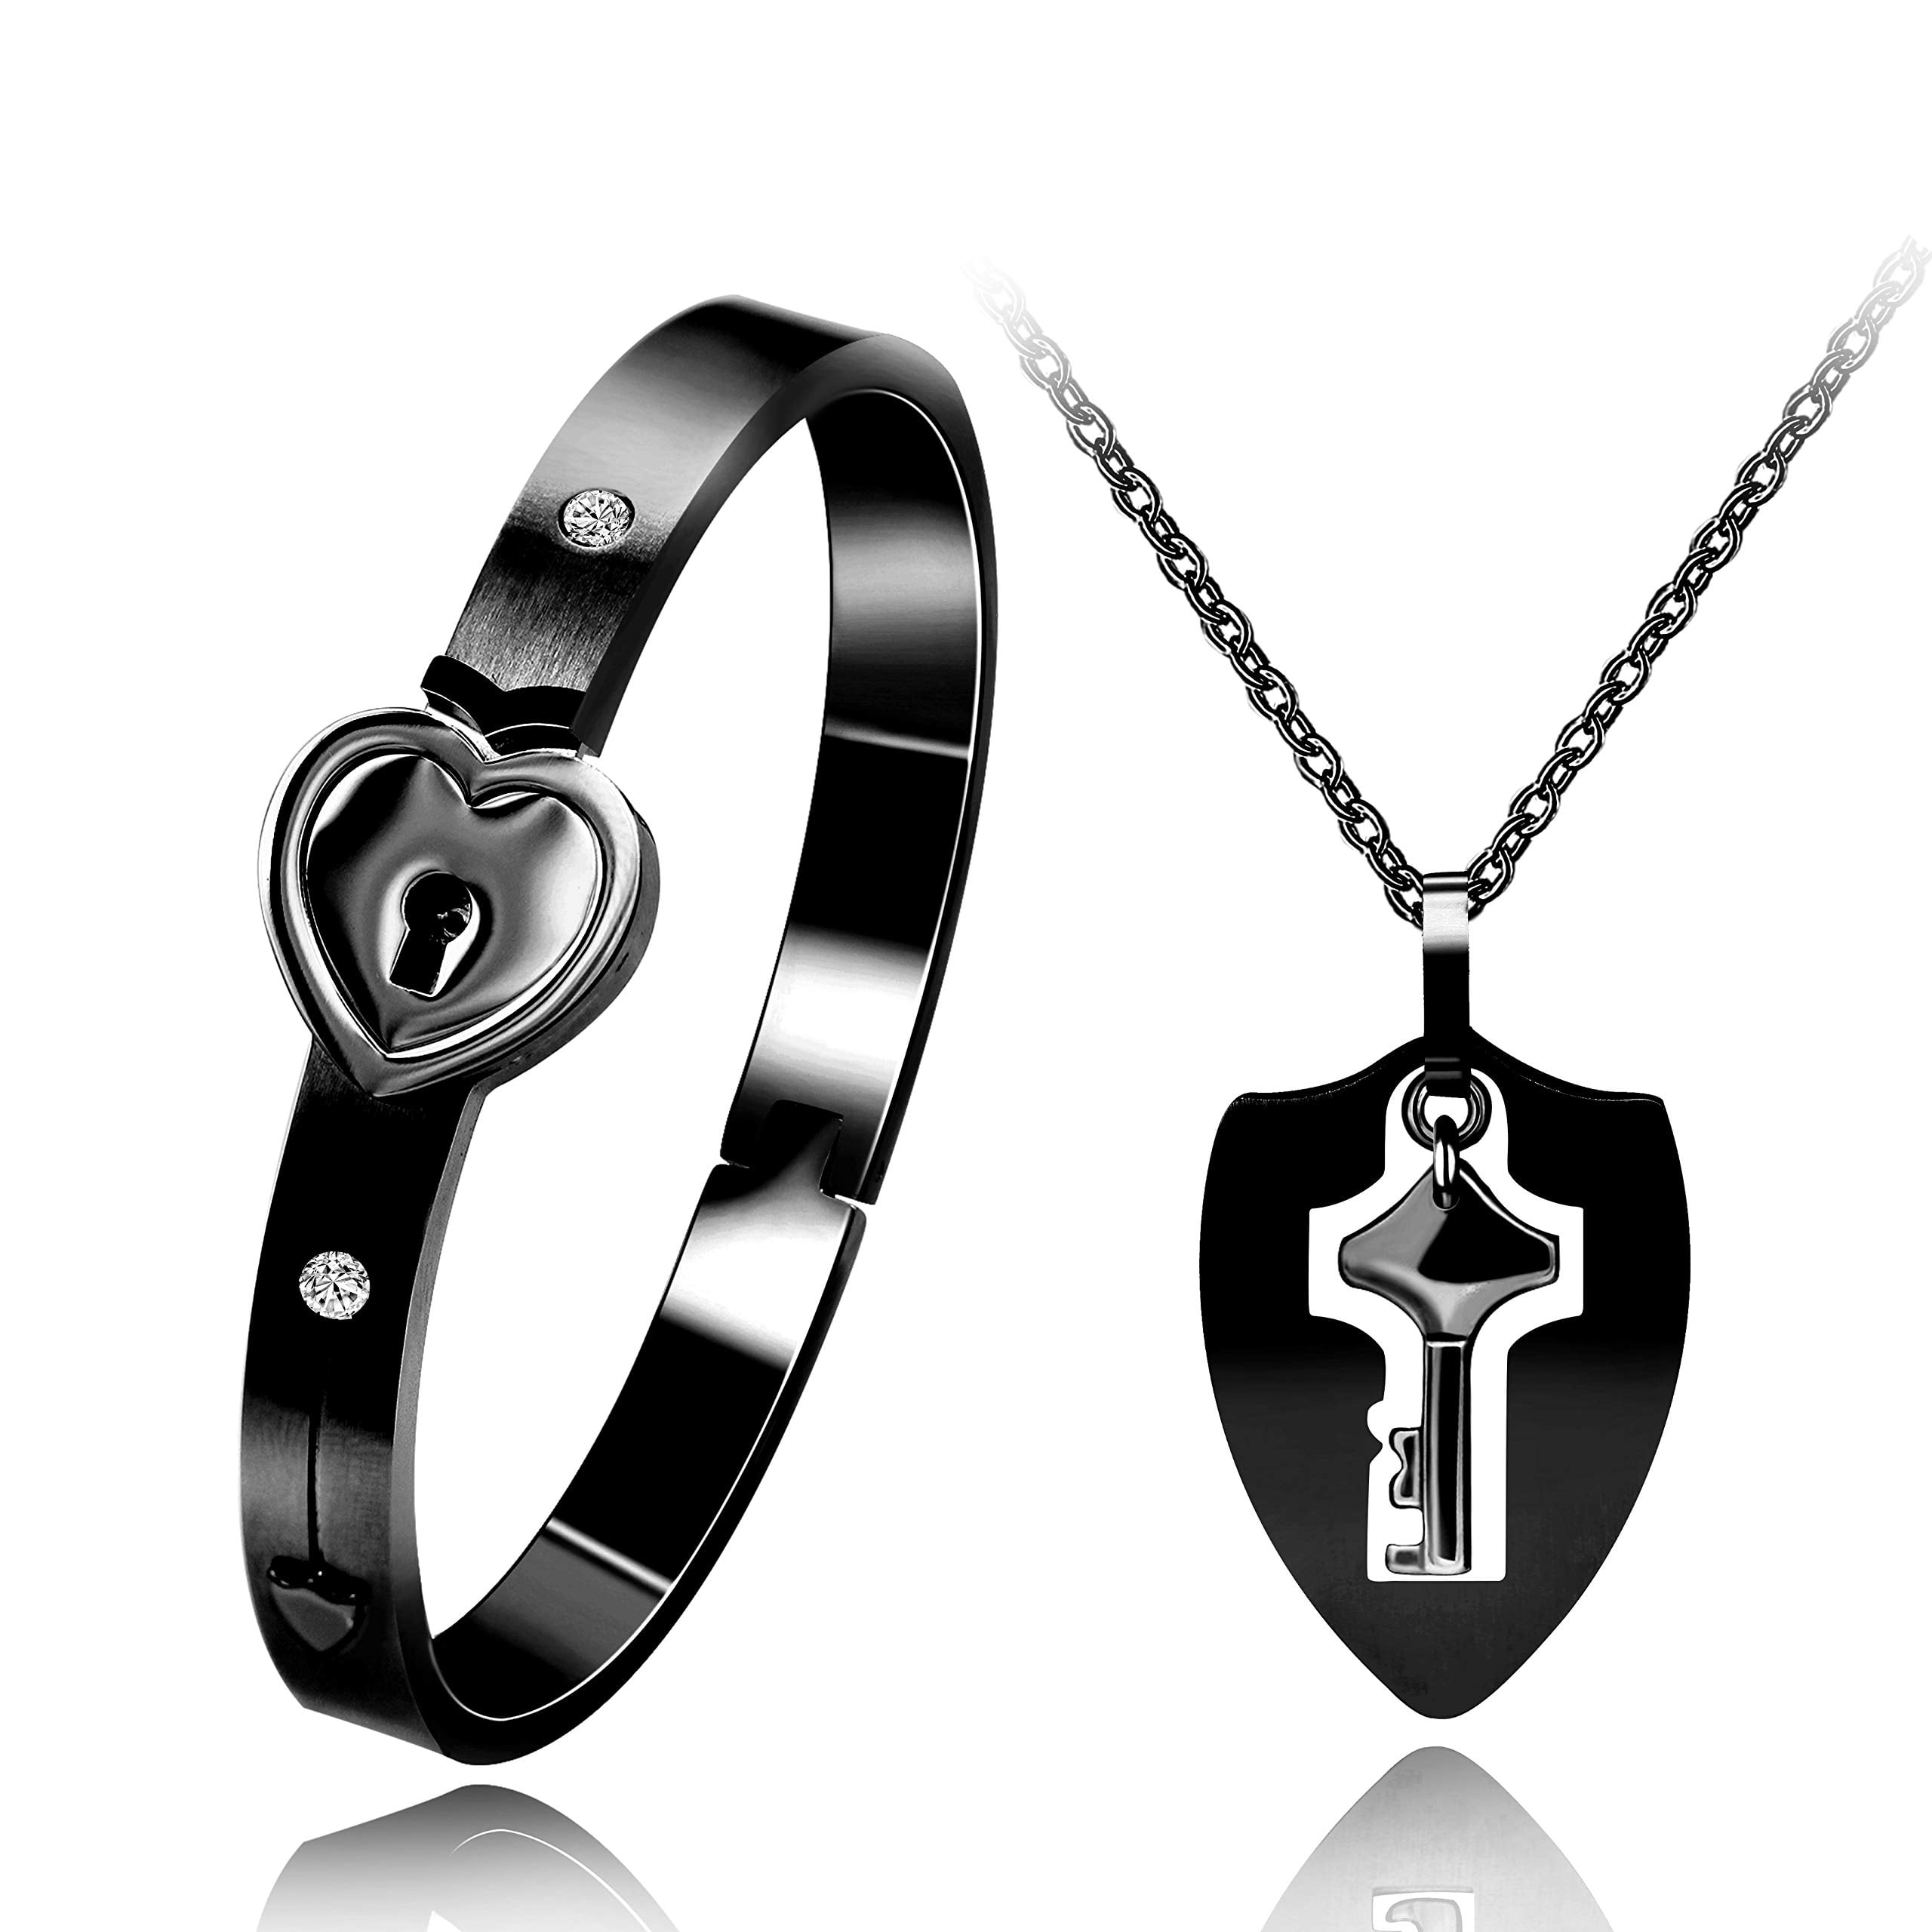 Stainless Steel Love Heart Lock Bangle Bracelet and Key Pendant Necklace  Set in Rampur at best price by Boys Jewellery & Tattoo Shop - Justdial